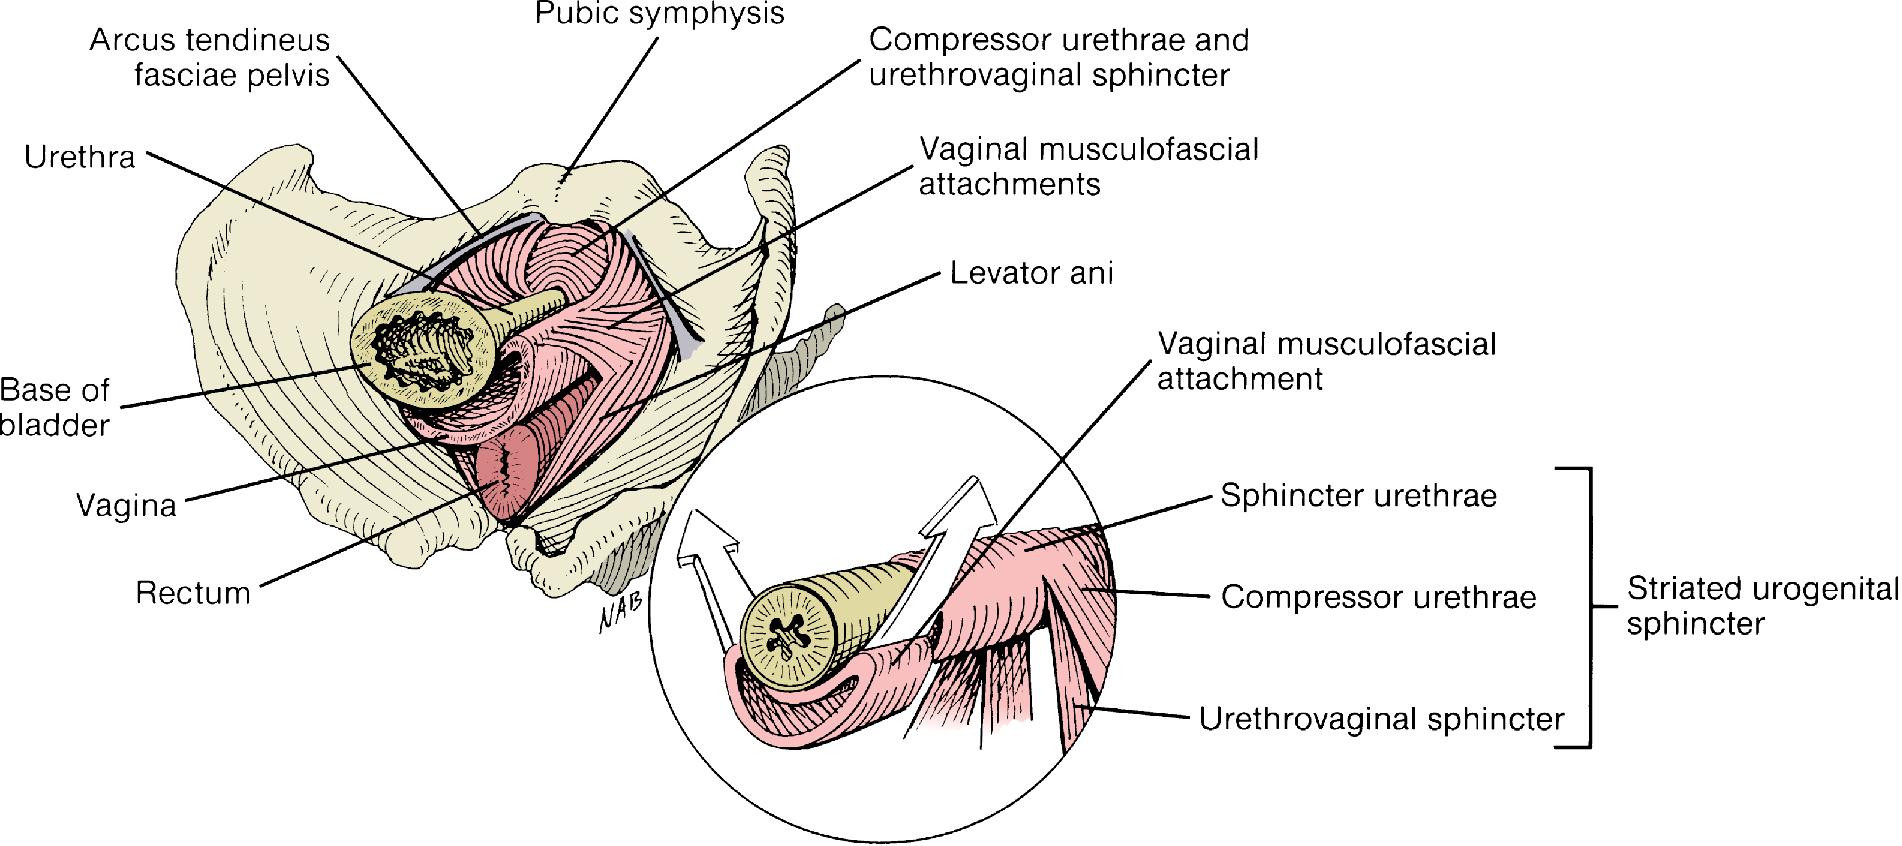 Fig. 1.7, Diagrammatic representation showing the component parts of the urethral support and sphincteric mechanisms. Note that the proximal urethra and bladder neck are supported by the anterior vaginal wall and its musculofascial attachments to the pelvic diaphragm. Inset , Contraction of the levator ani muscles elevates the anterior vagina and overlying bladder neck and proximal urethra, contributing to bladder neck closure. The sphincter urethrae, urethrovaginal sphincter, and compressor urethrae are all parts of the striated urogenital sphincter.